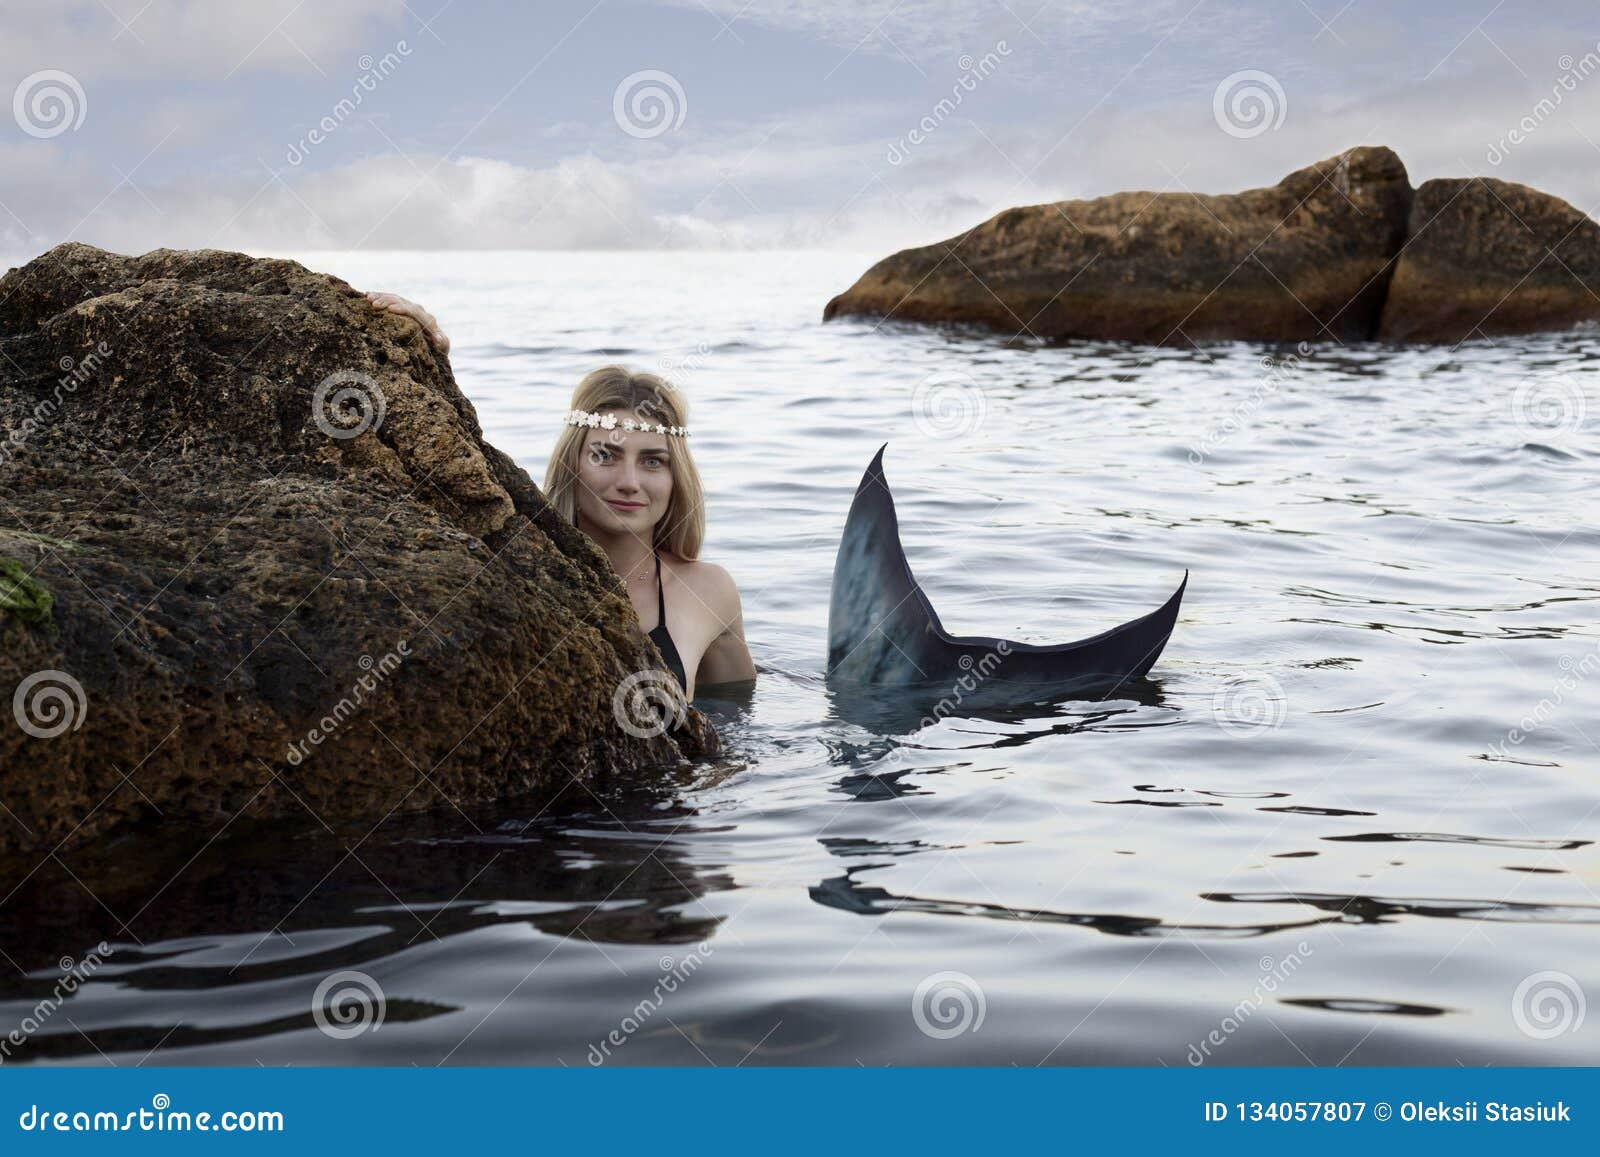 Mermaid Swims in the Water Peeking Out of the Rocks Stock Image ...